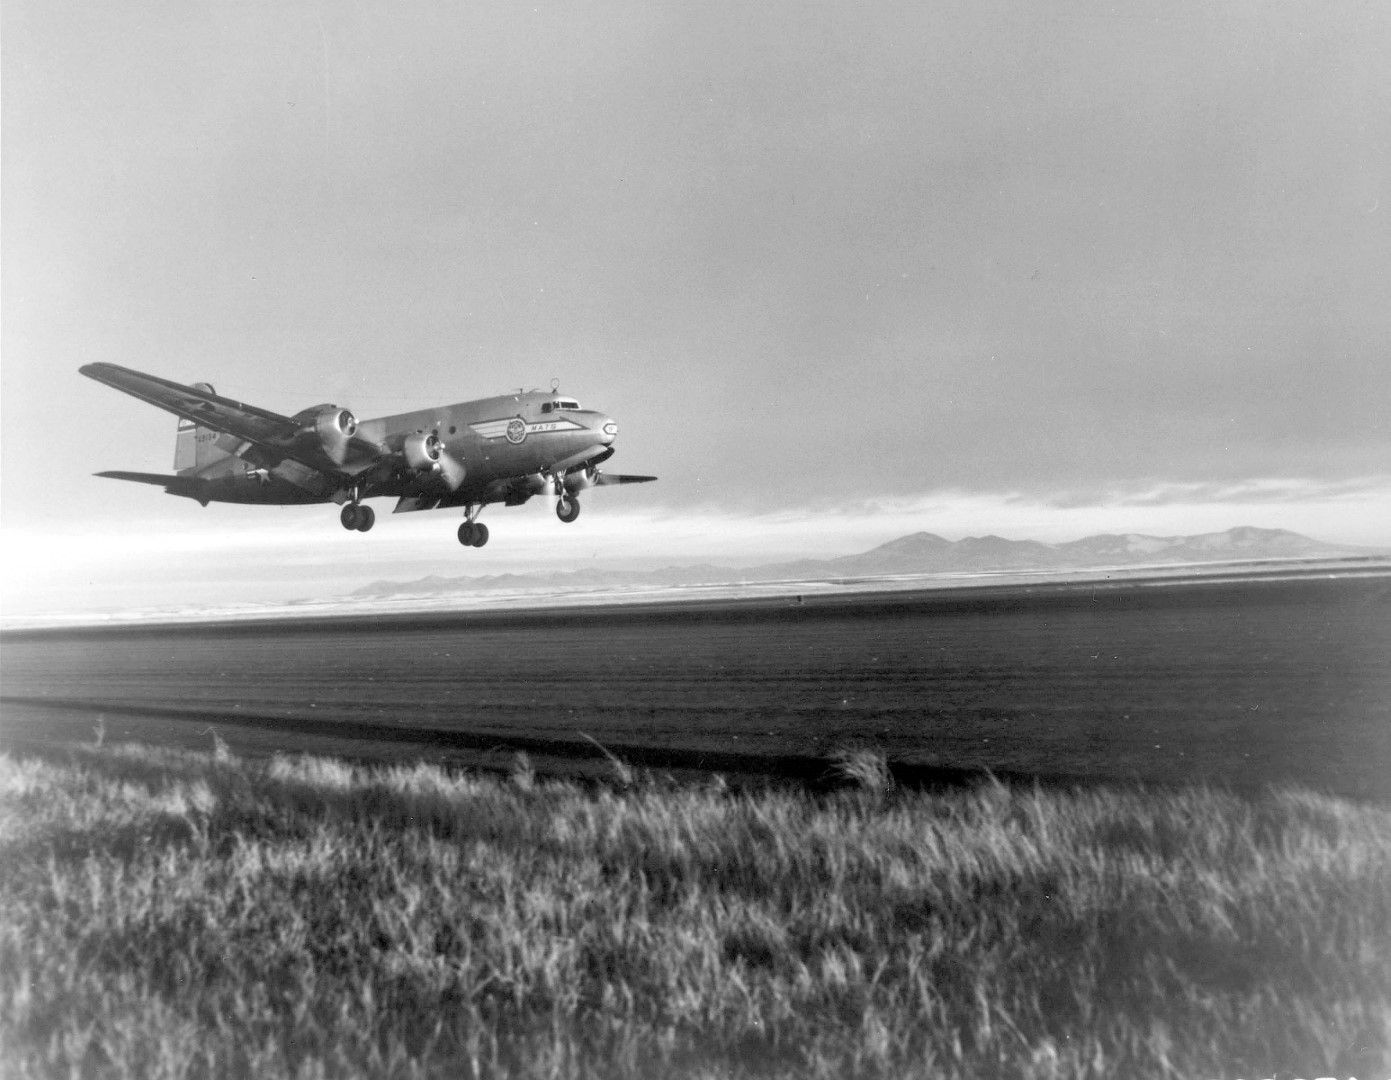 A Douglas C-54 Skymaster practices a "Tempelhof Landing" at Great Falls Air Force Base, Mont. Student pilots were taught this special type of landing to simulate flight conditions at Tempelhof airport, Berlin. The approach glide angle is very steep and the airplanes touch down with a high-nose altitude and are held nose-high until engines slow down. This causes the wing to act as an airbrake and use of the wheel brakes is cut to a minimum. (U.S. Air Force photo)